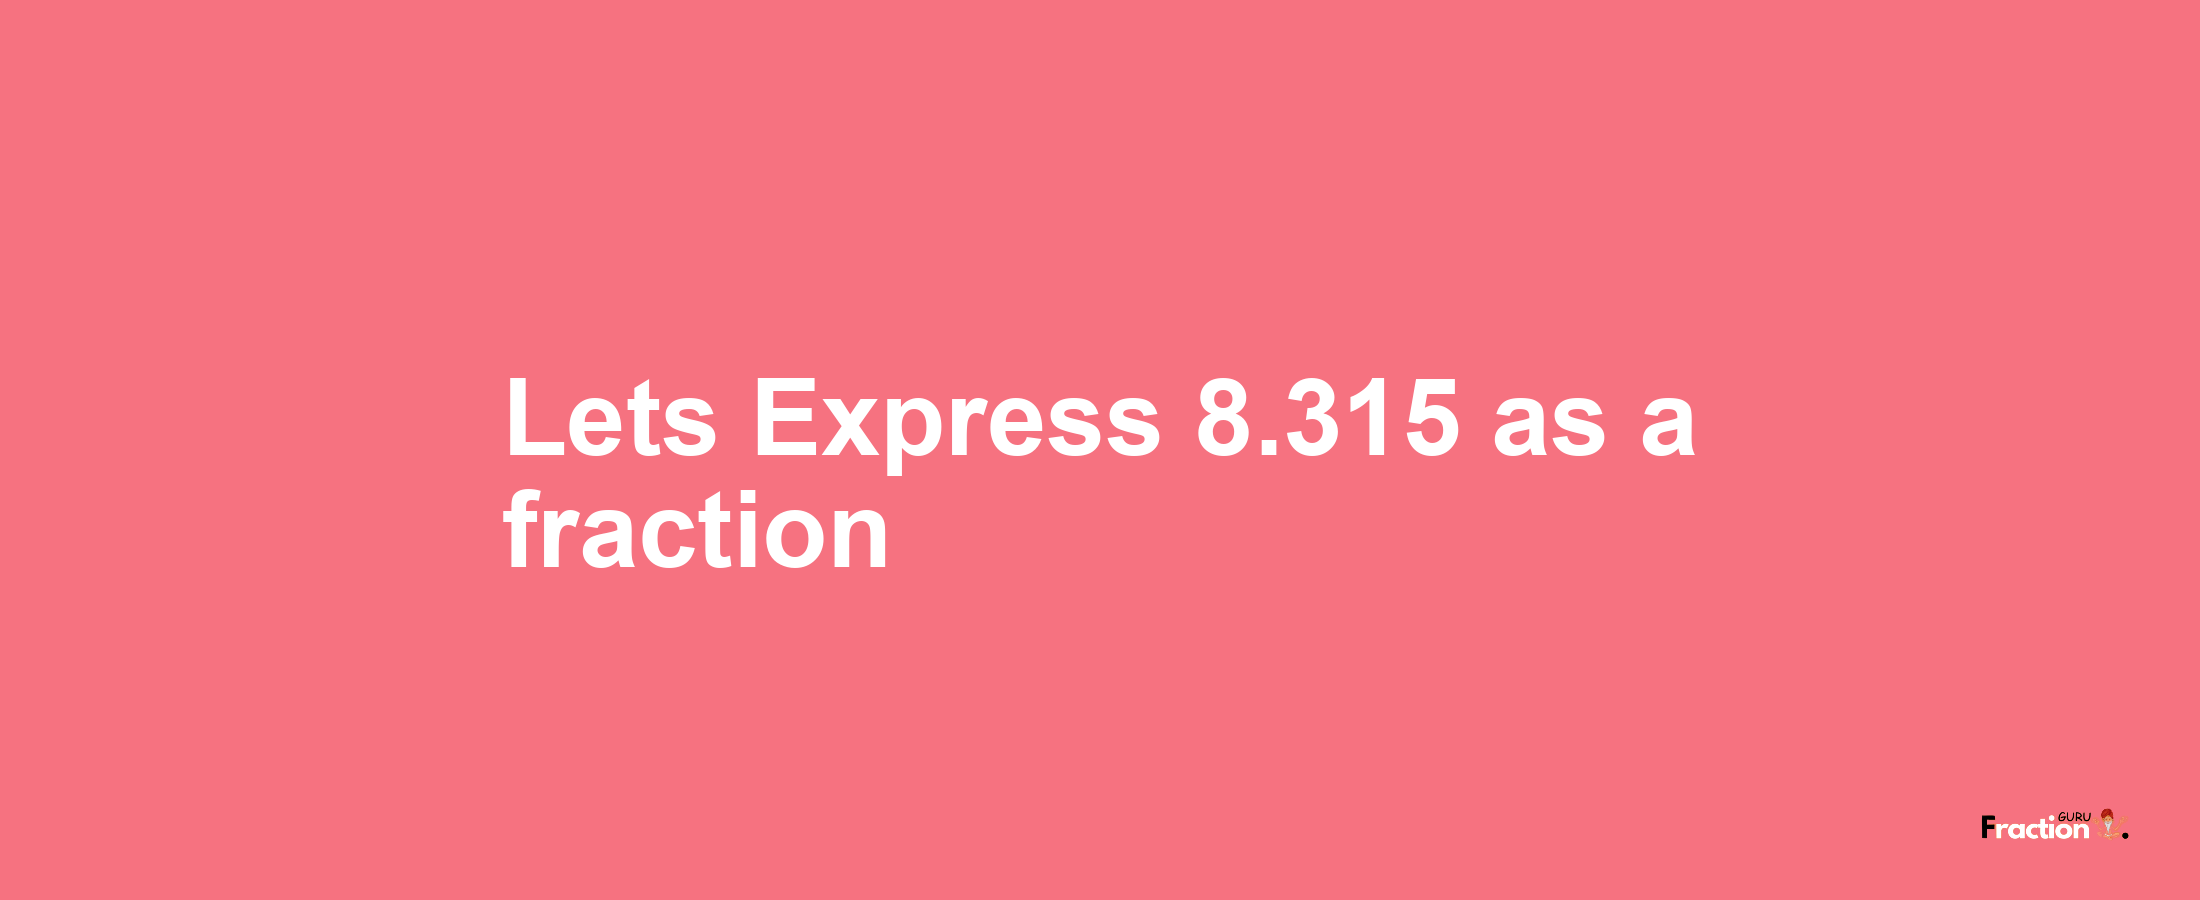 Lets Express 8.315 as afraction